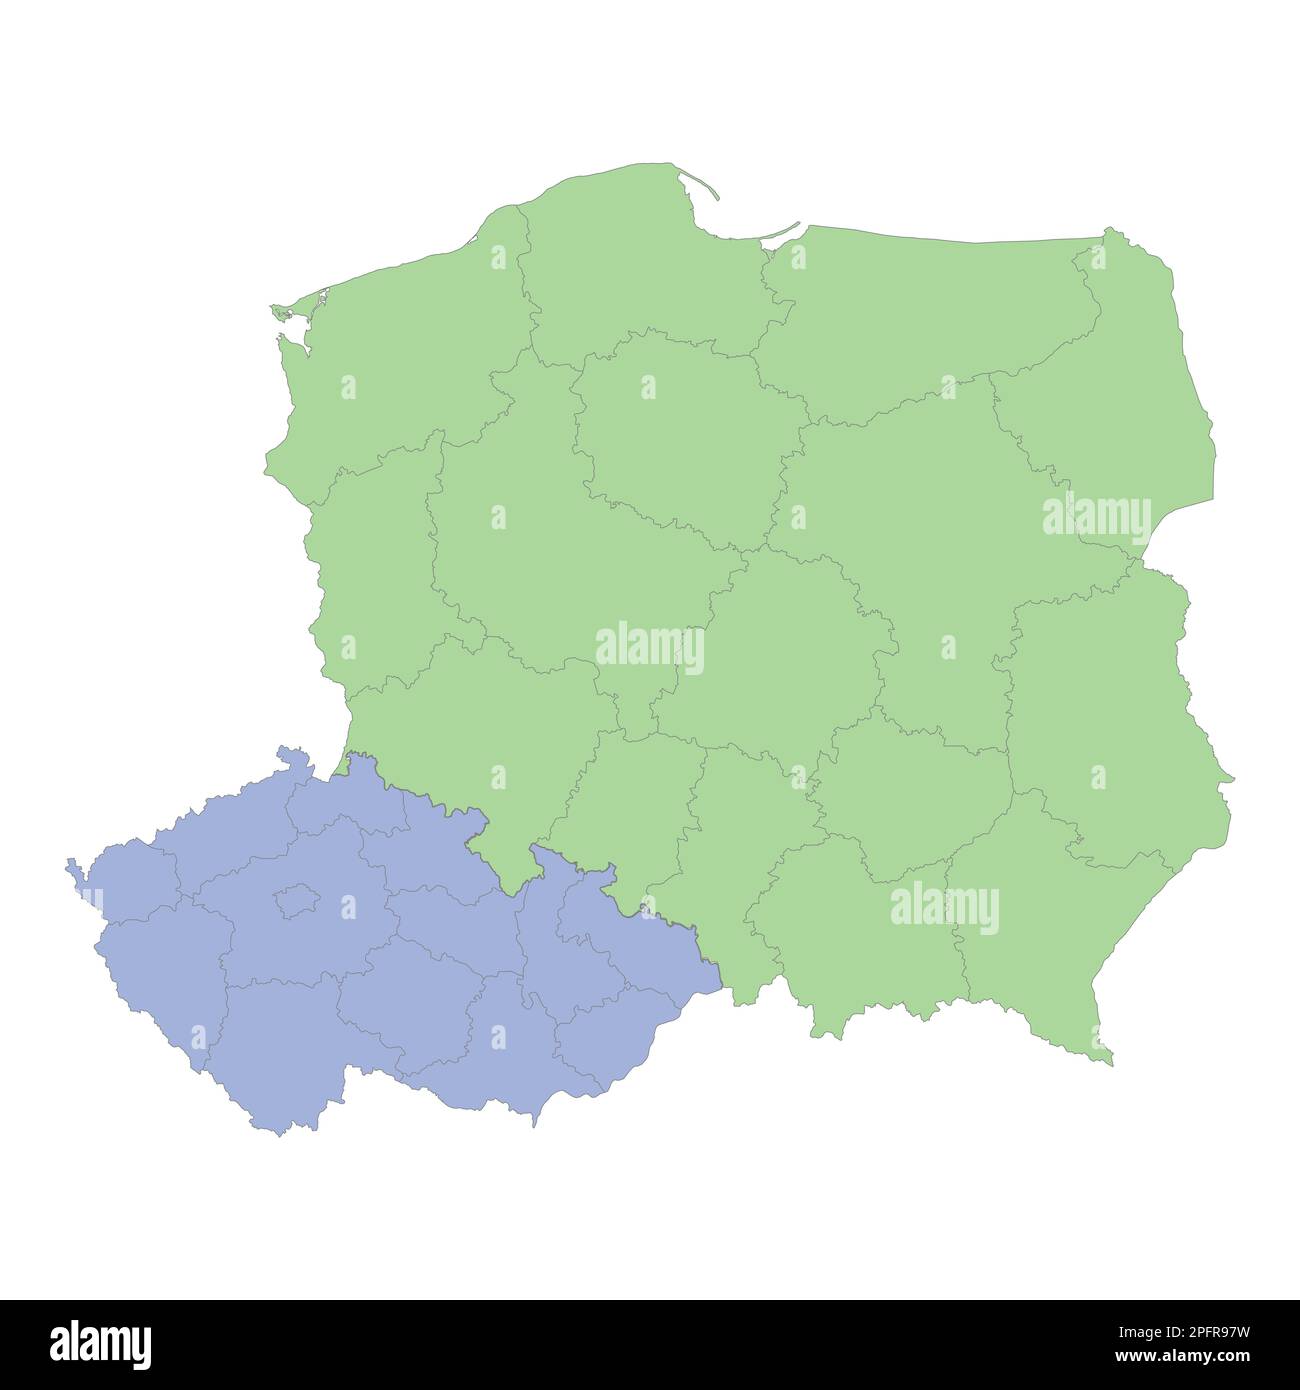 High Quality Political Map Of Poland And Czech Republic With Borders Of The Regions Or Provinces Vector Illustration 2PFR97W 